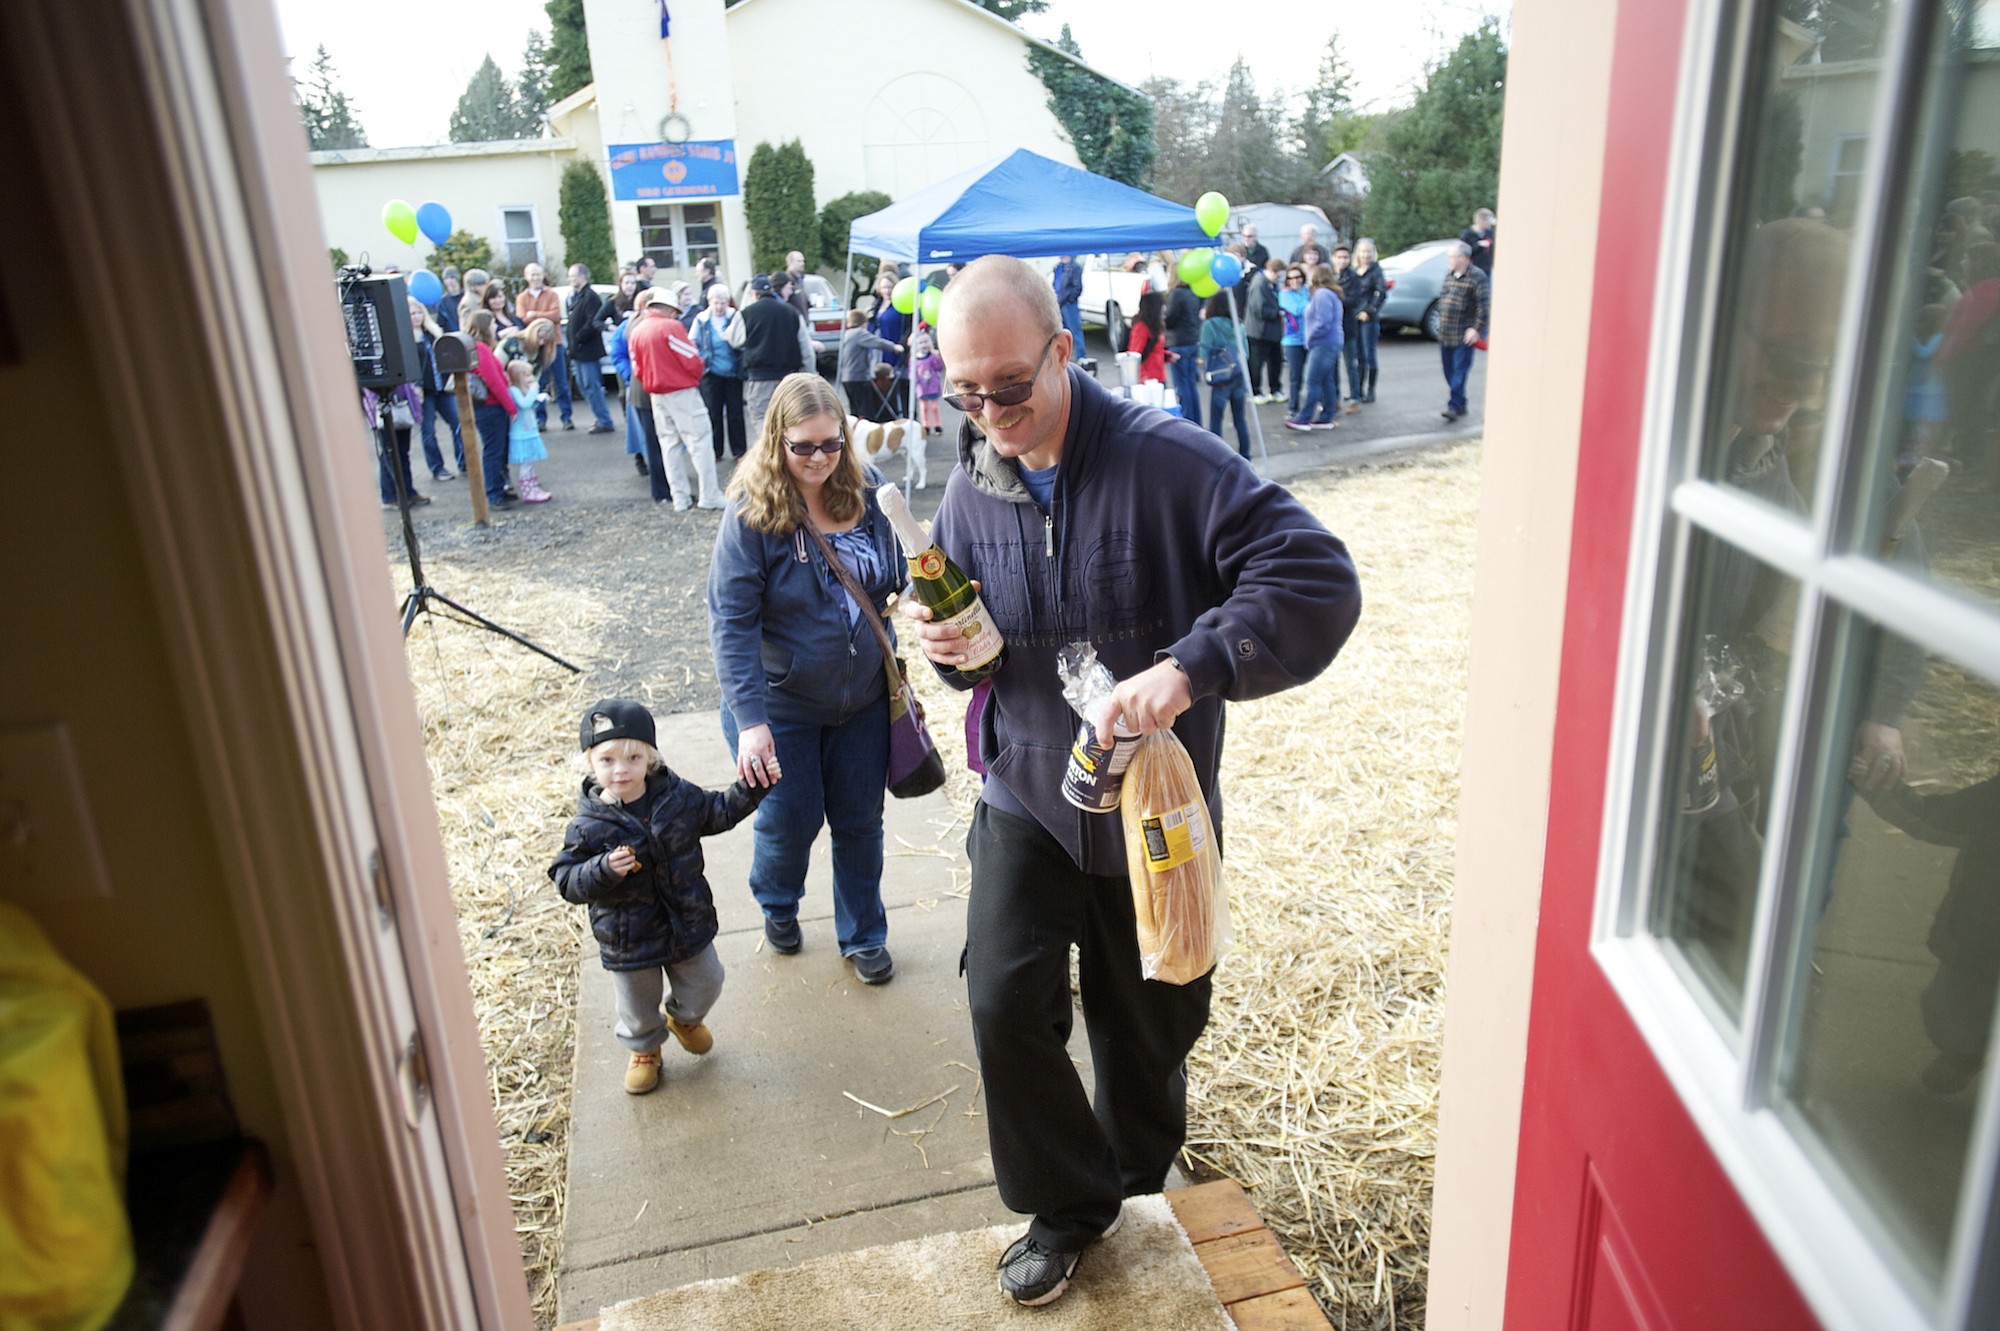 Charles Frost, right, leads his family, from left, Charles Deacon, 2, Michelle and 8-year-old Serenity (behind her dad) into their new home. Well-wishers had just given them the traditional housewarming gifts of bread, salt and wine.